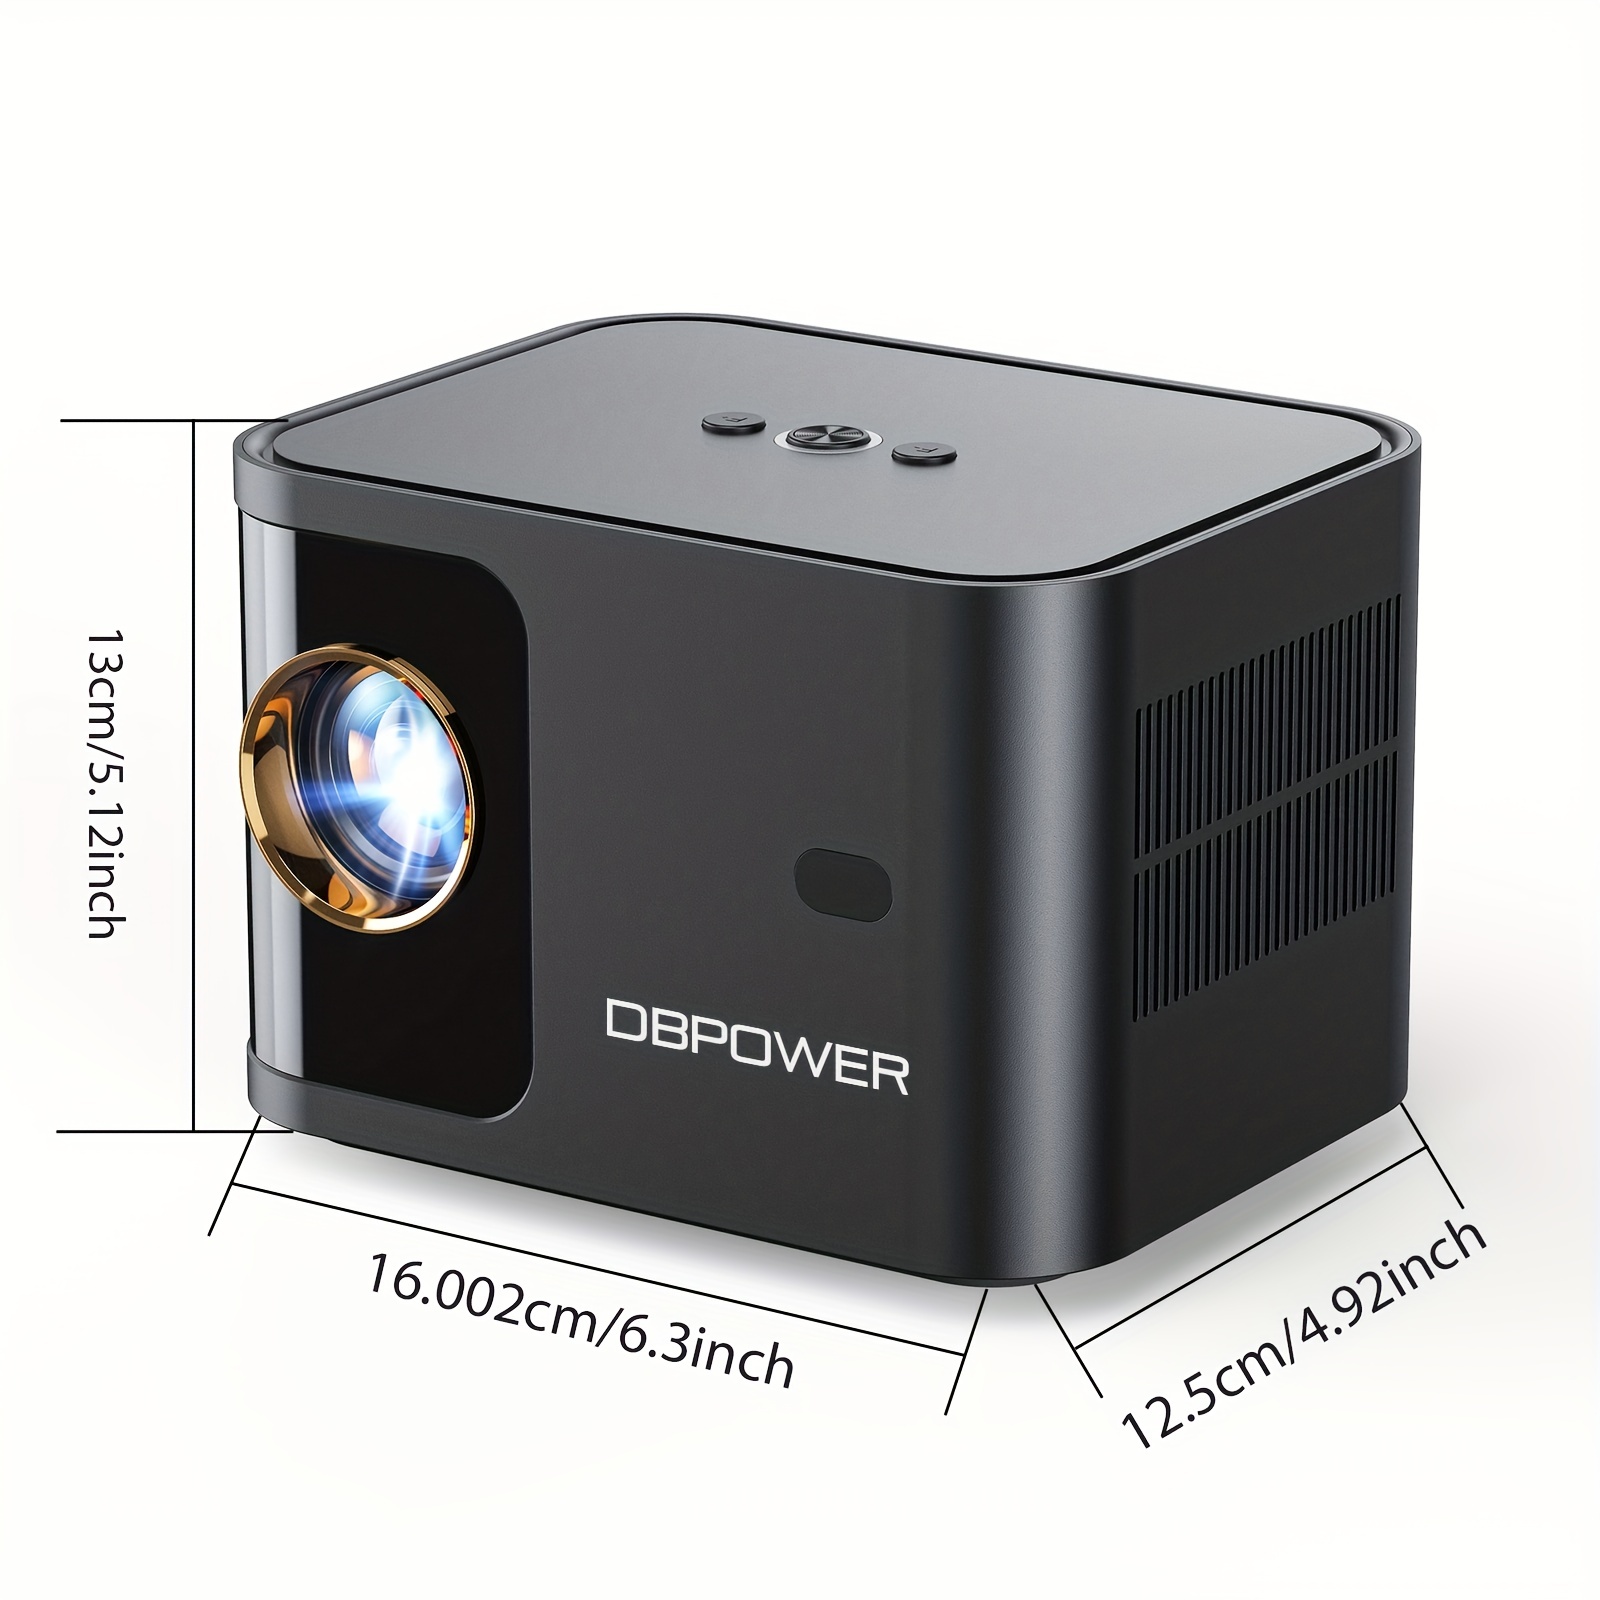 Use My Reviews - DBPOWER H89 Smartphone Projector Review